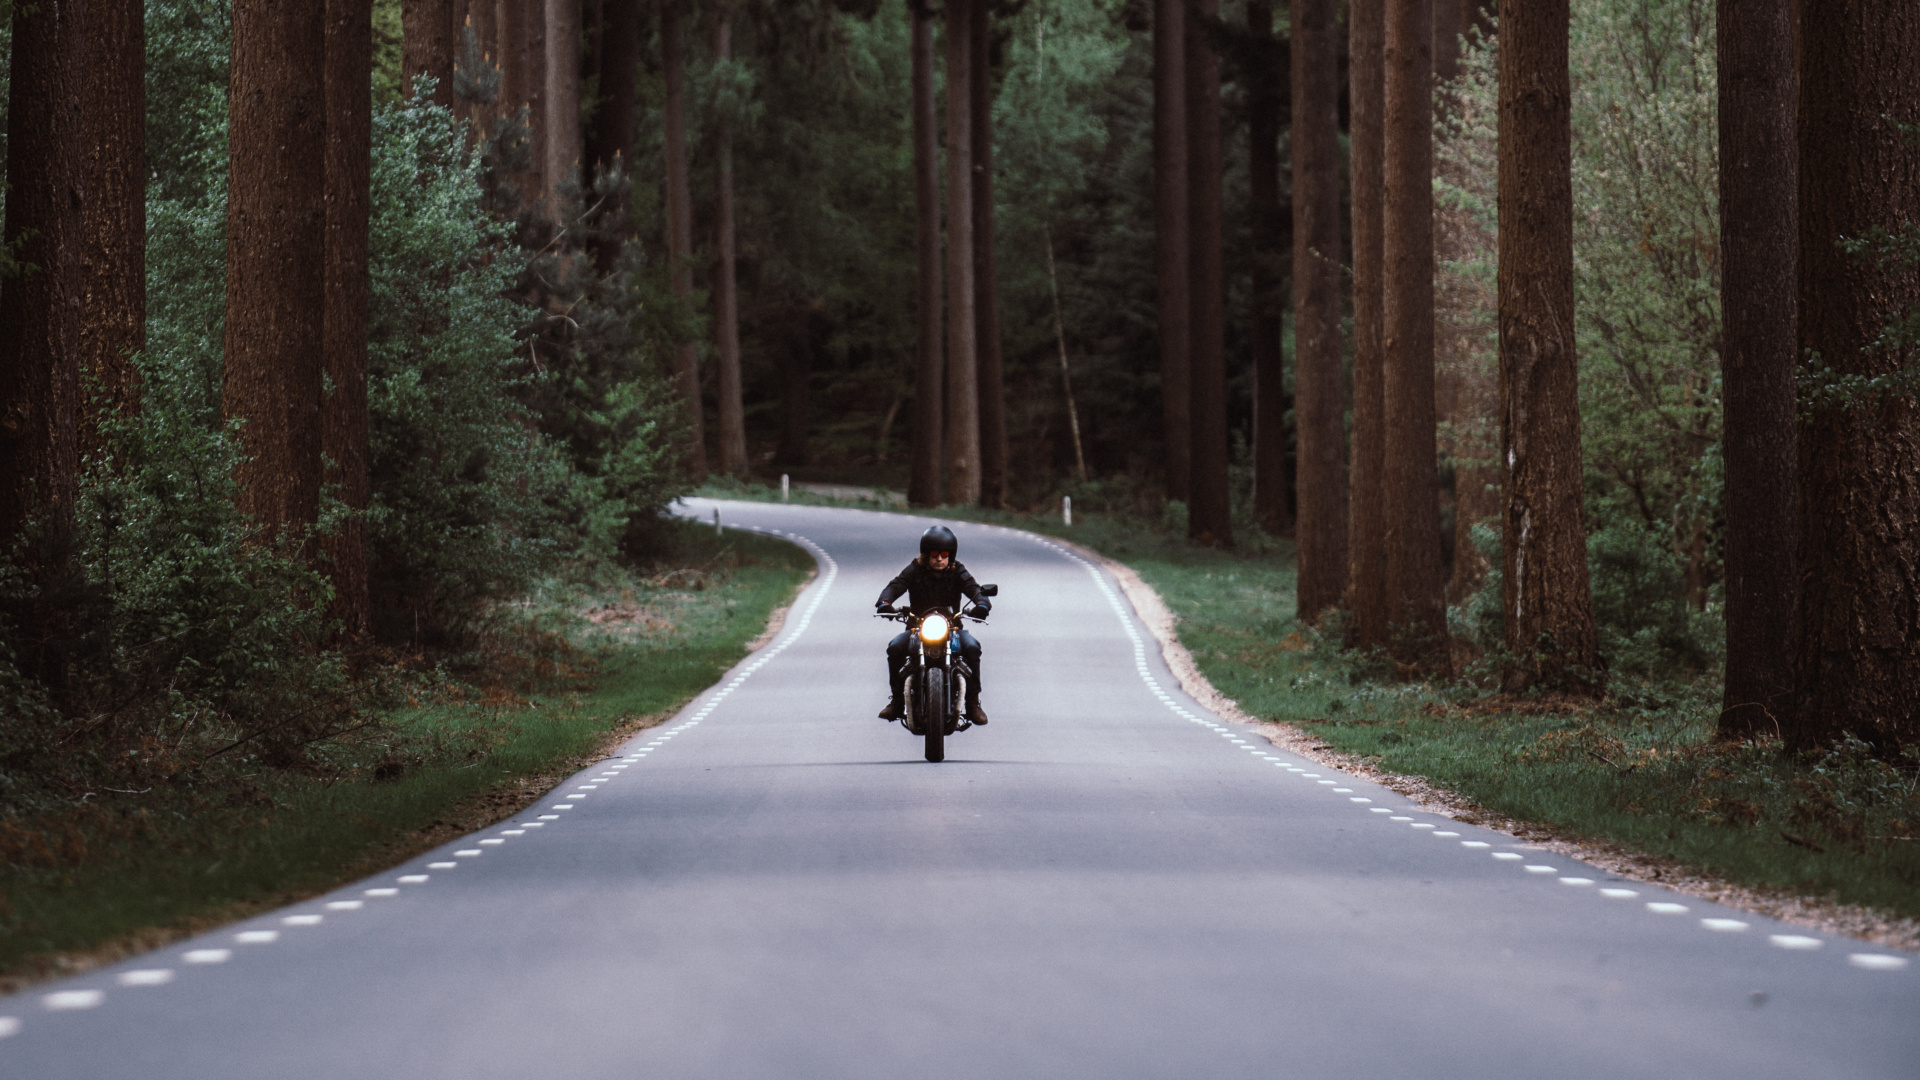 Person Riding Motorcycle on Road Between Trees During Daytime. Wallpaper in 1920x1080 Resolution